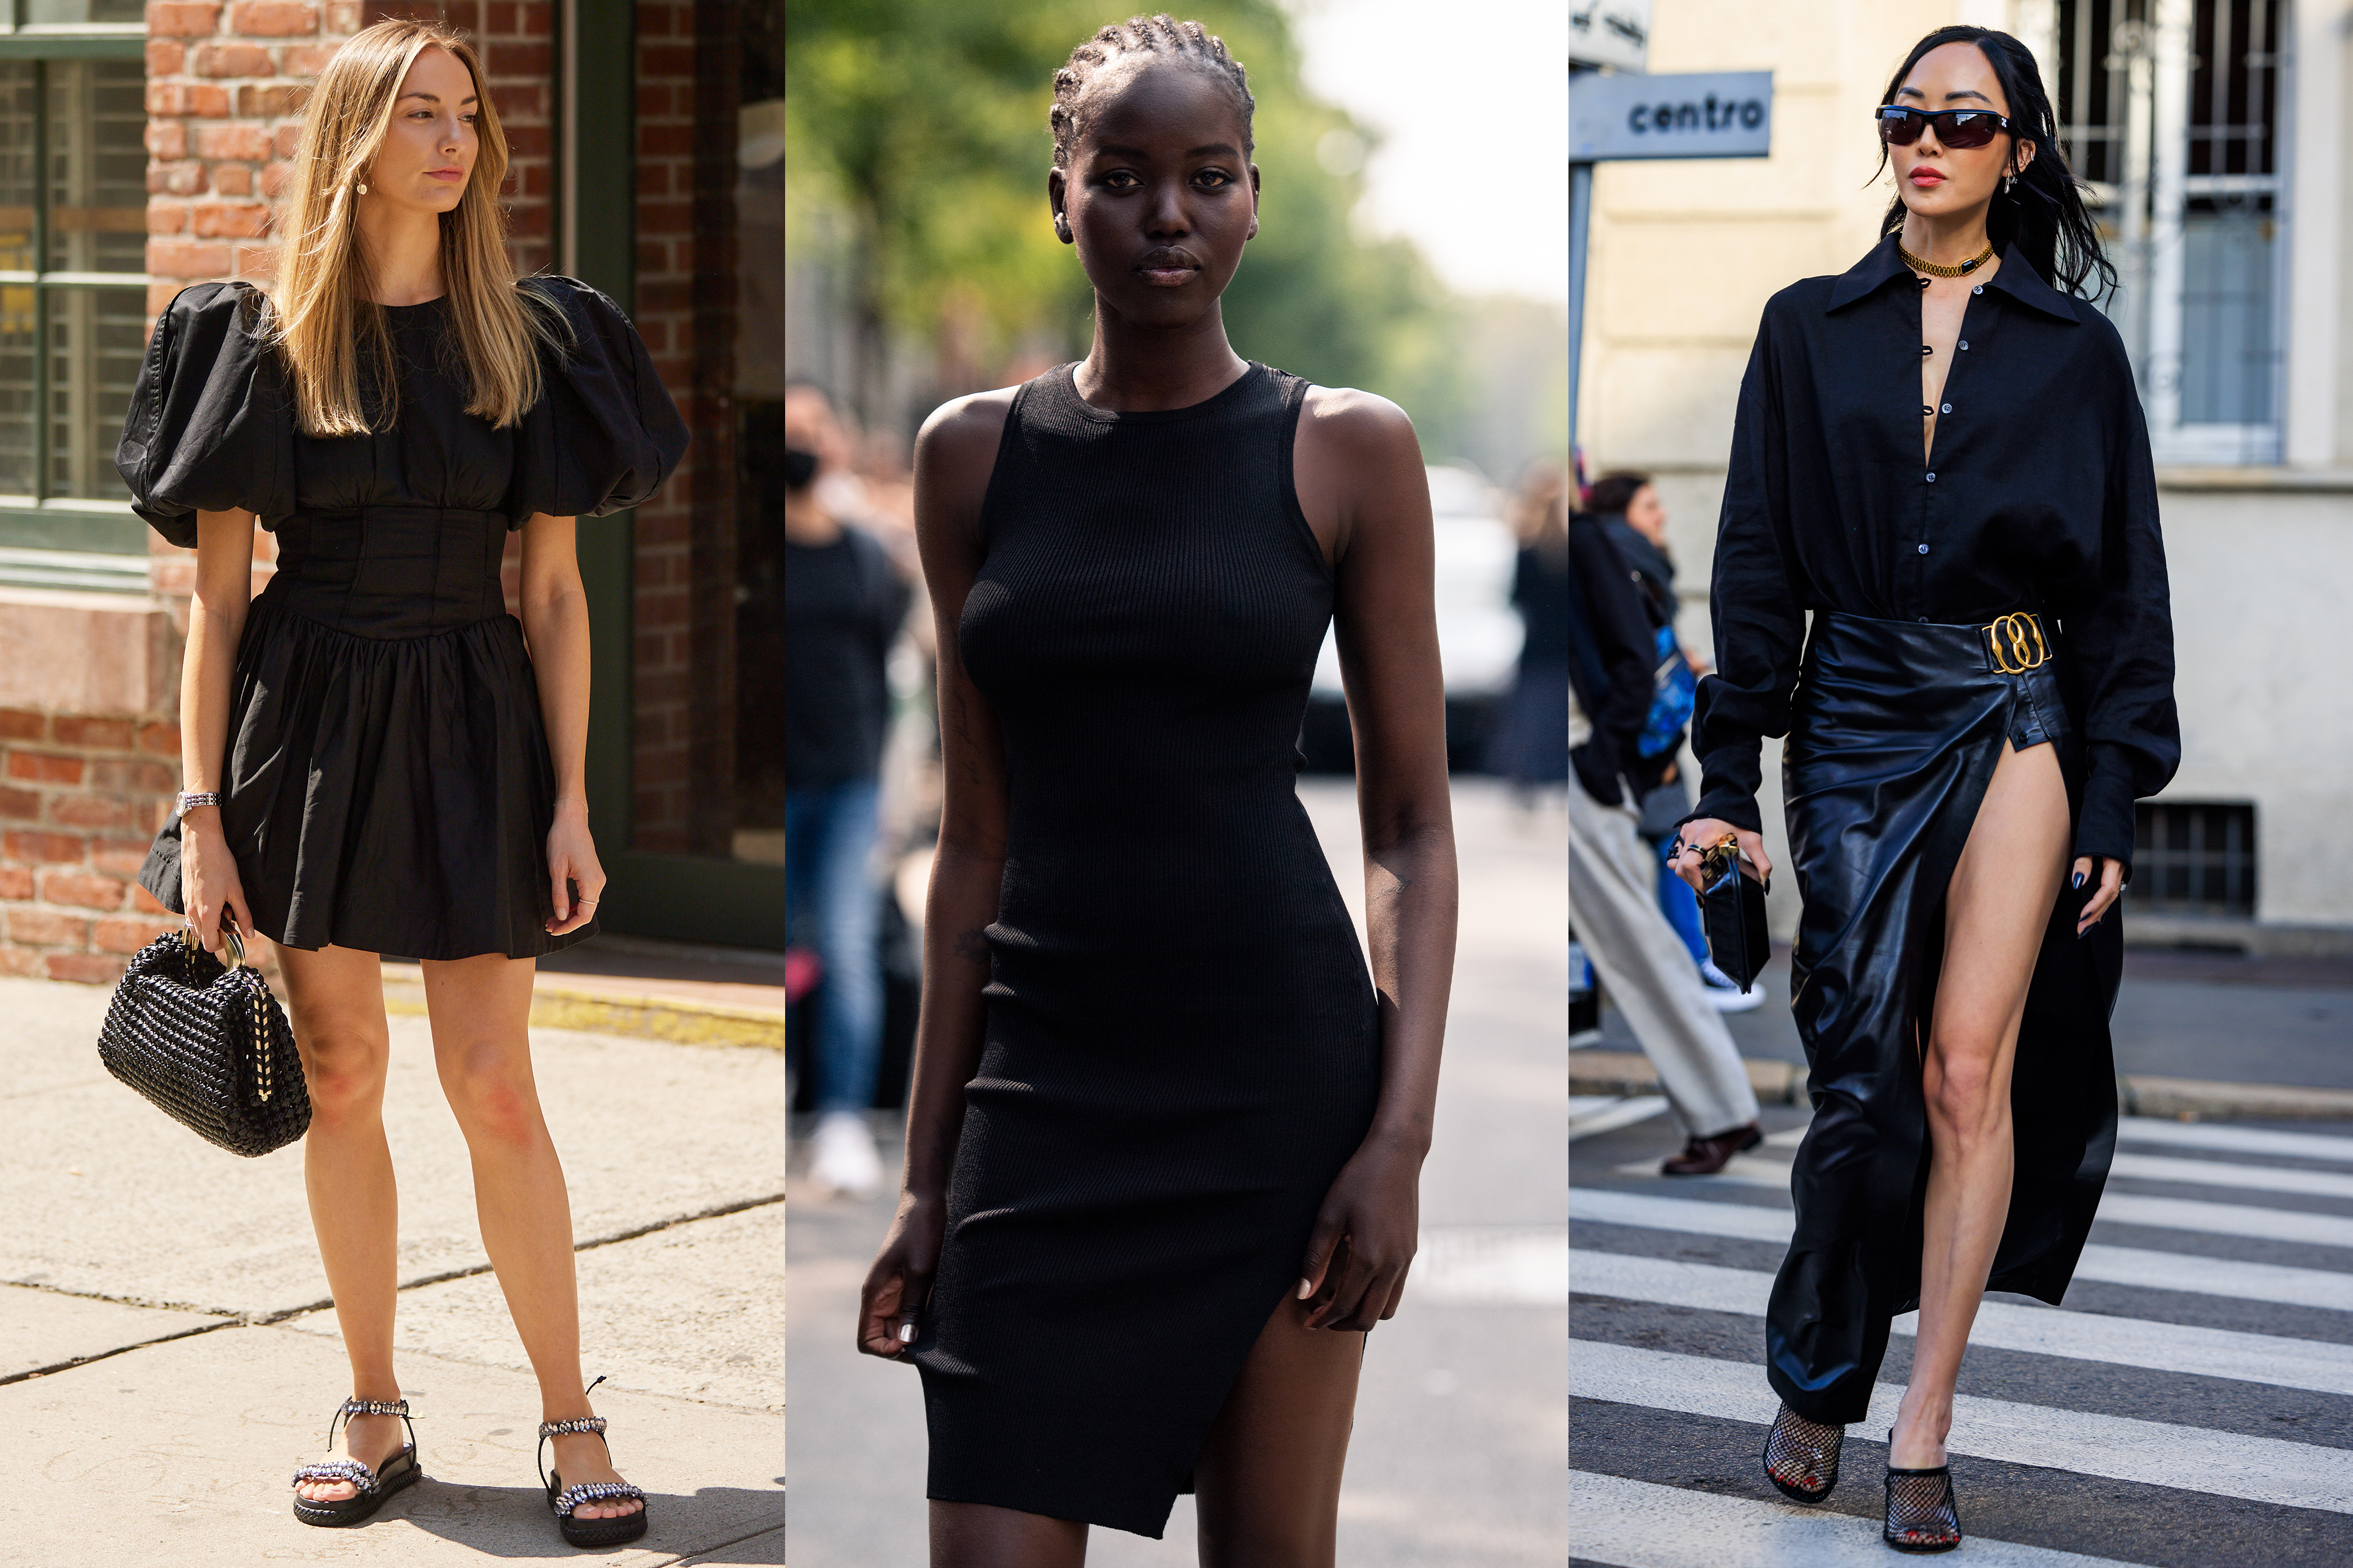 Black Dress Shirts Are a Celeb Favorite: How to Pull Off the Trend